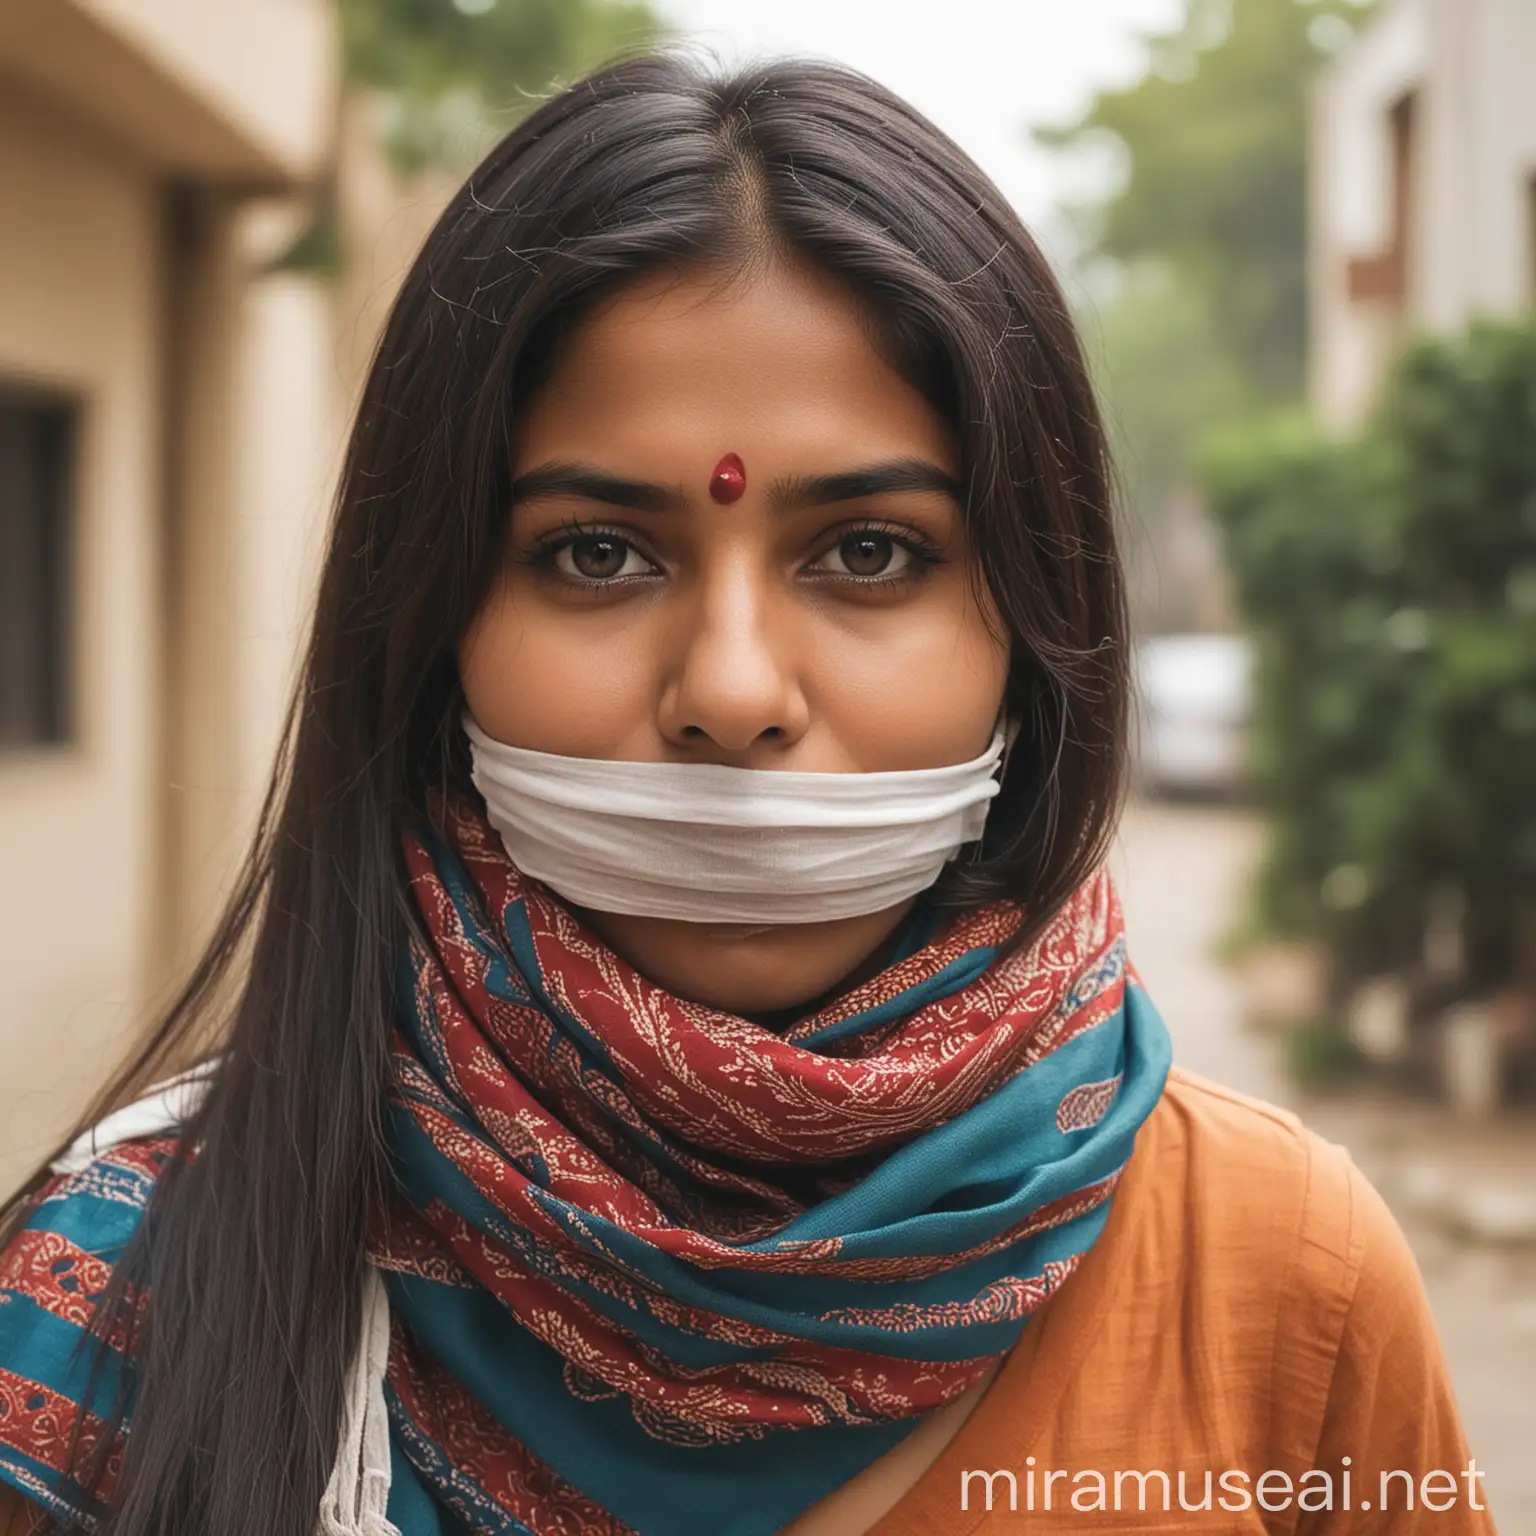 Indian girl mouth gagged with scarf 